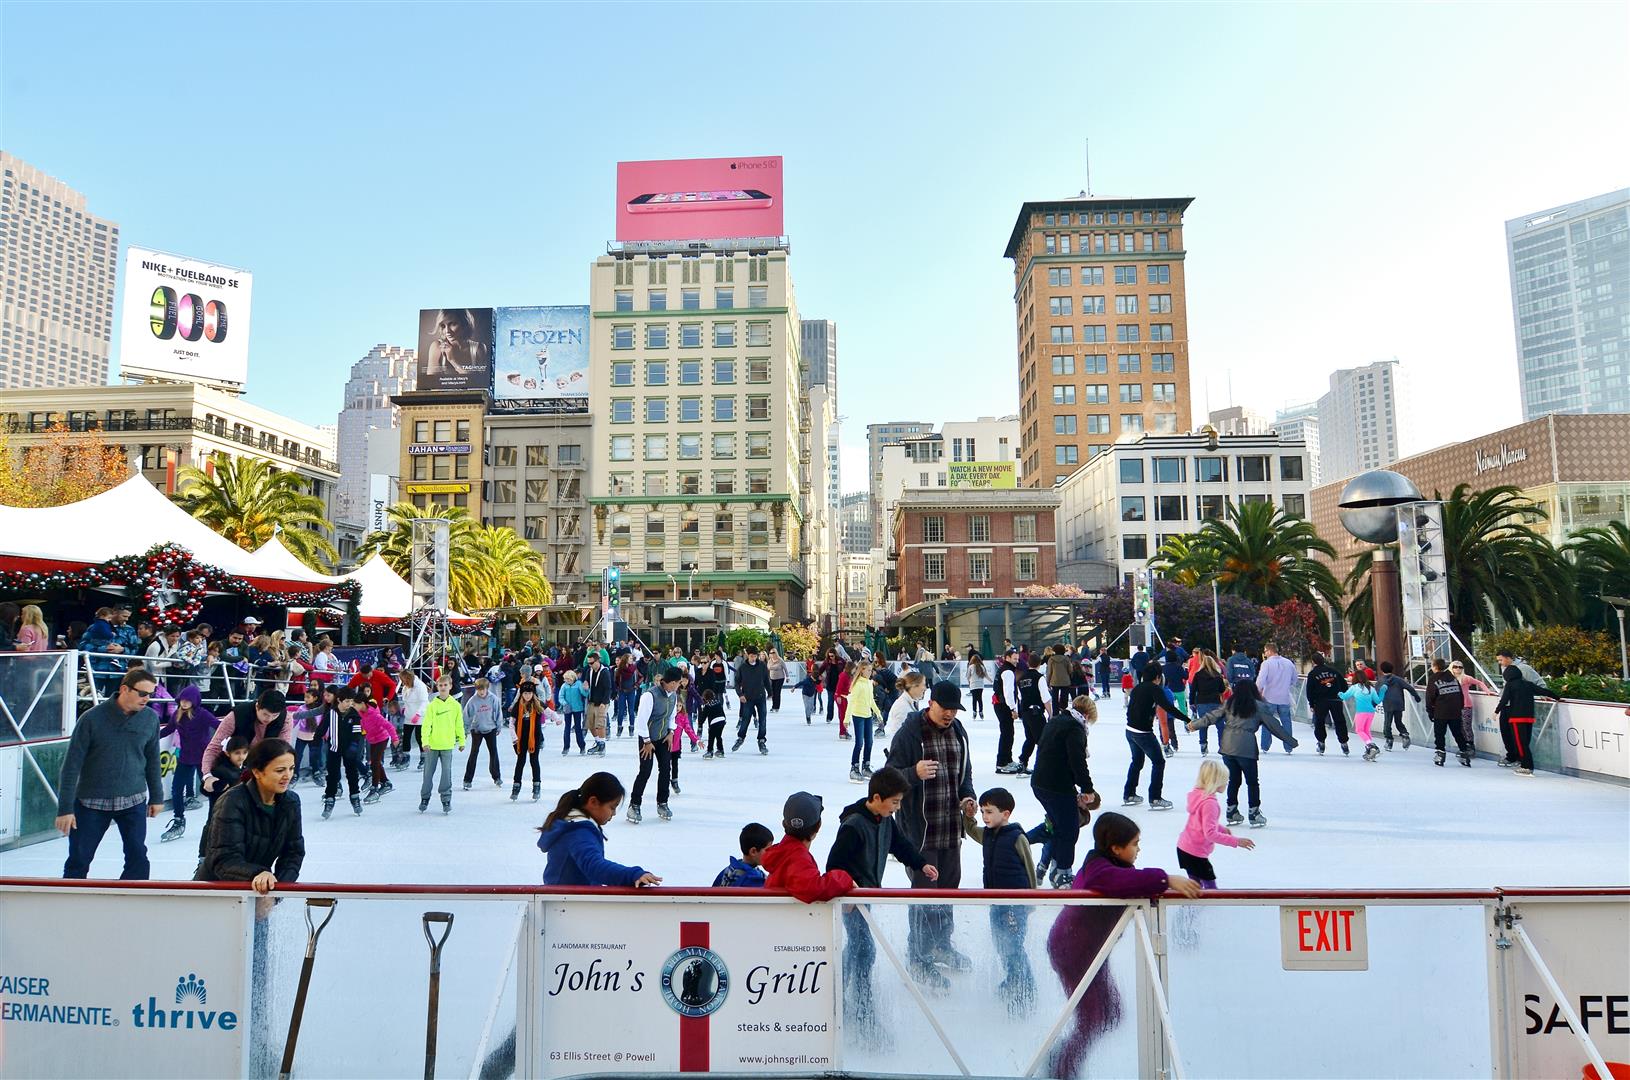 Children and adults in colorful clothing ice skate in Union Square on a sunny day.